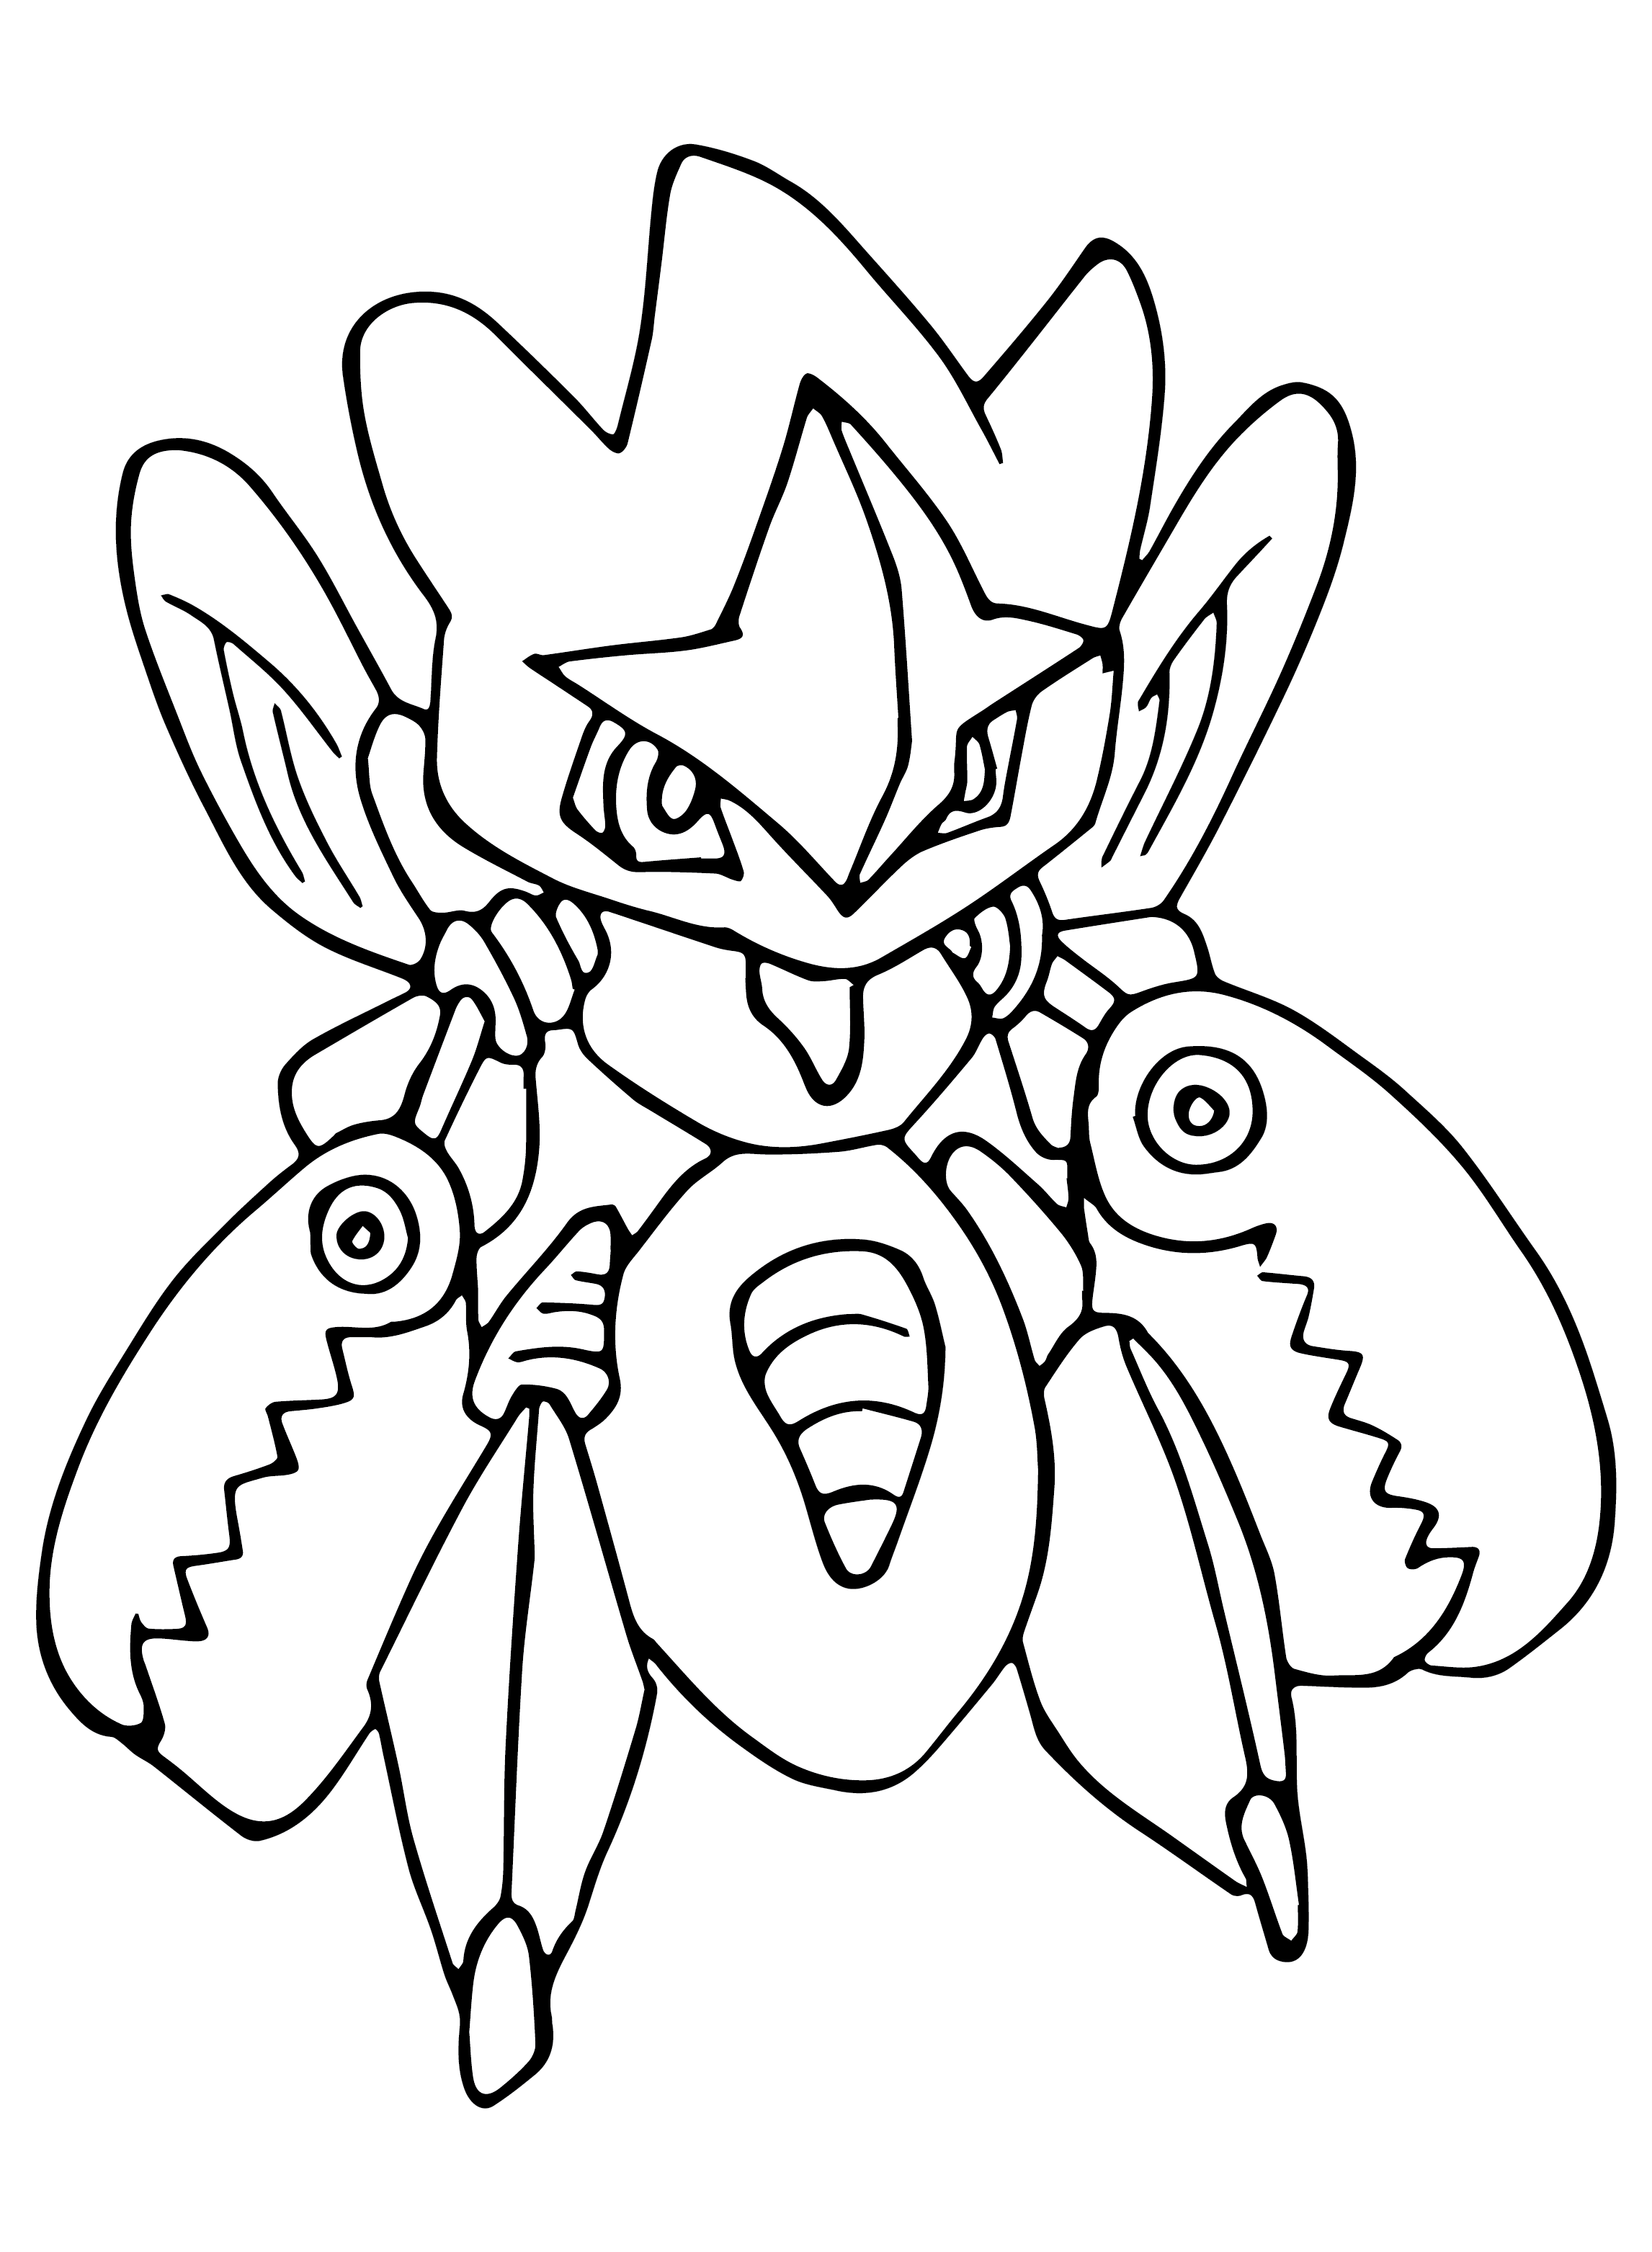 Hassam Mega Pokemon Coloring Pages to Printable